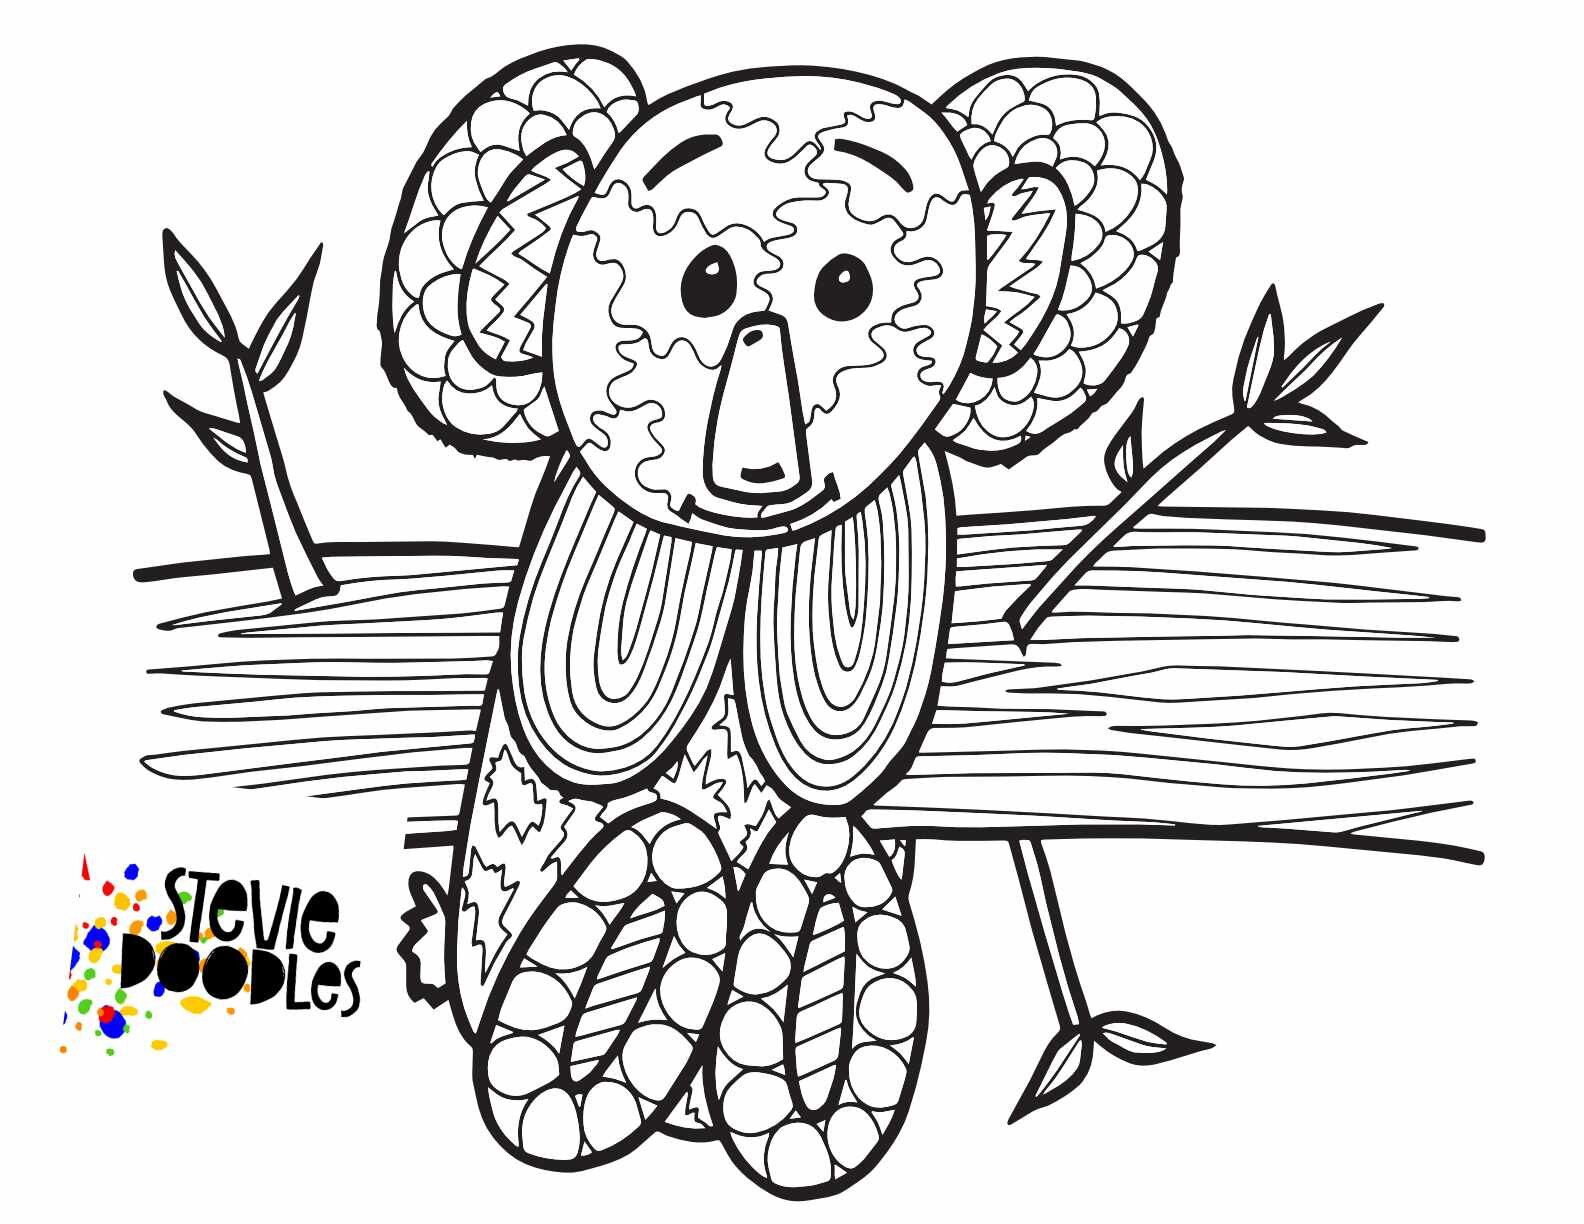 Free Koala Page! CLICK HERE TO DOWNLOAD THE PAGE ABOVE